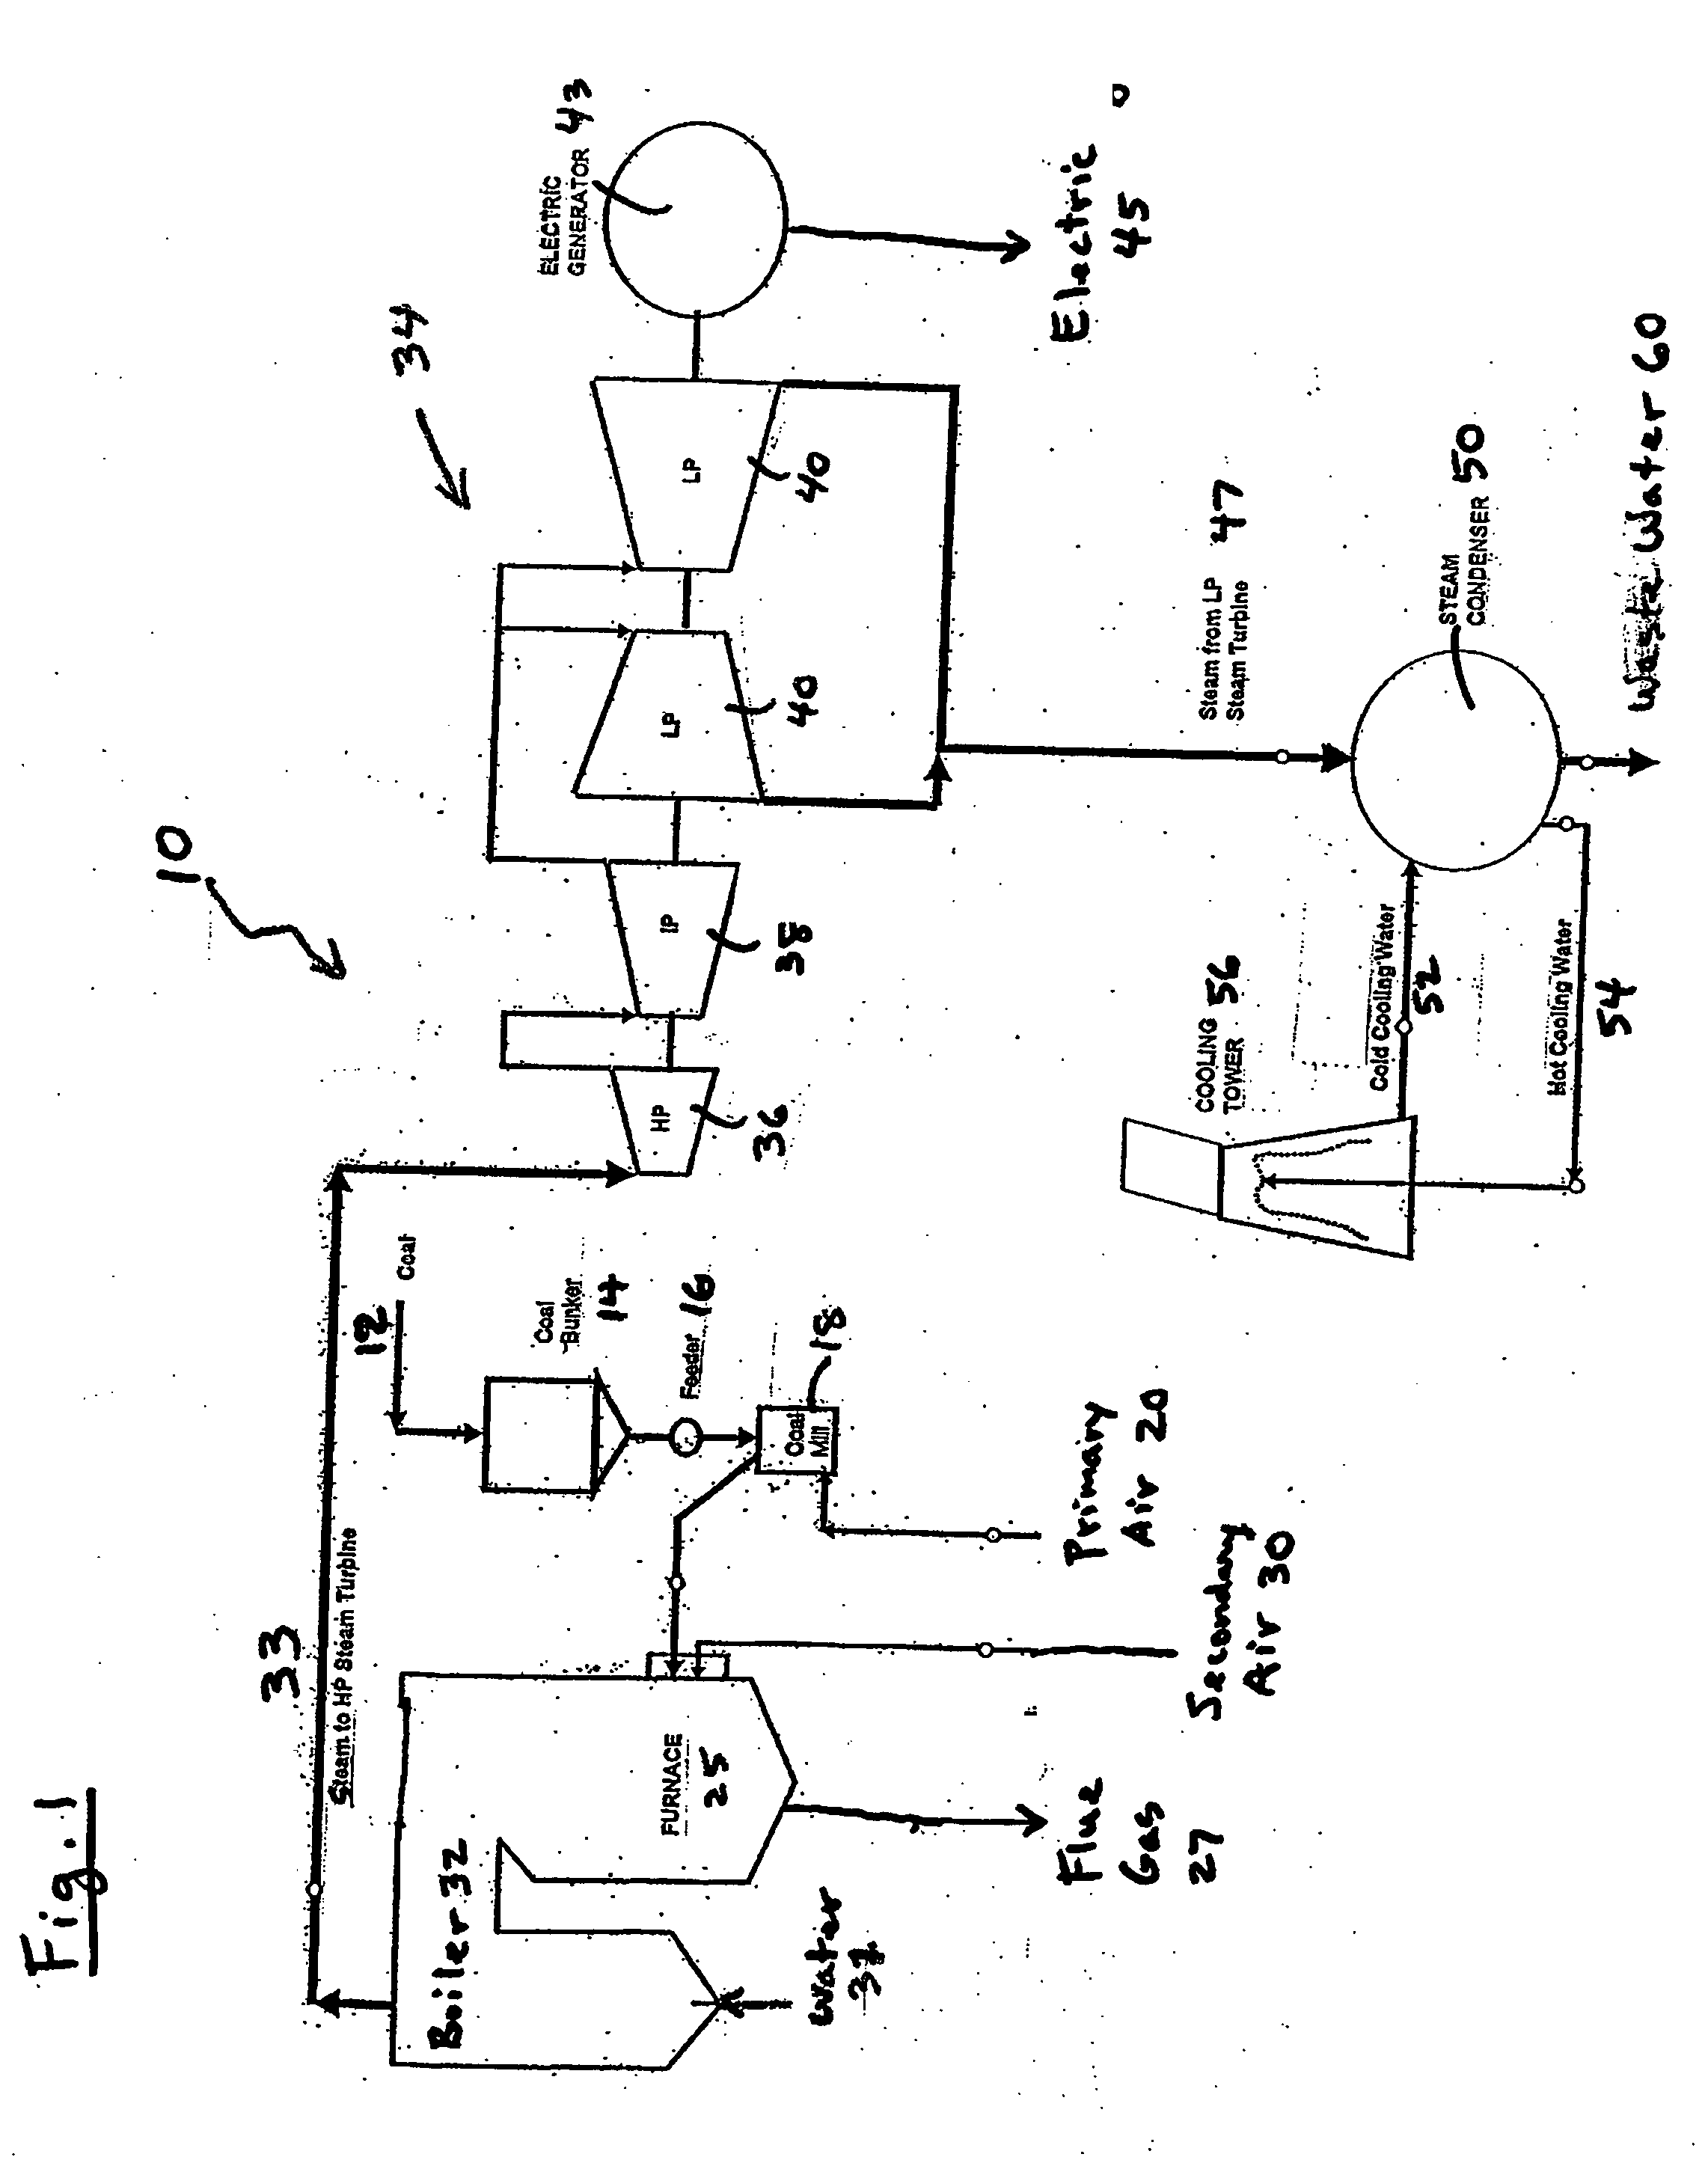 Apparatus and method of separating and concentrating organic and/or non-organic material